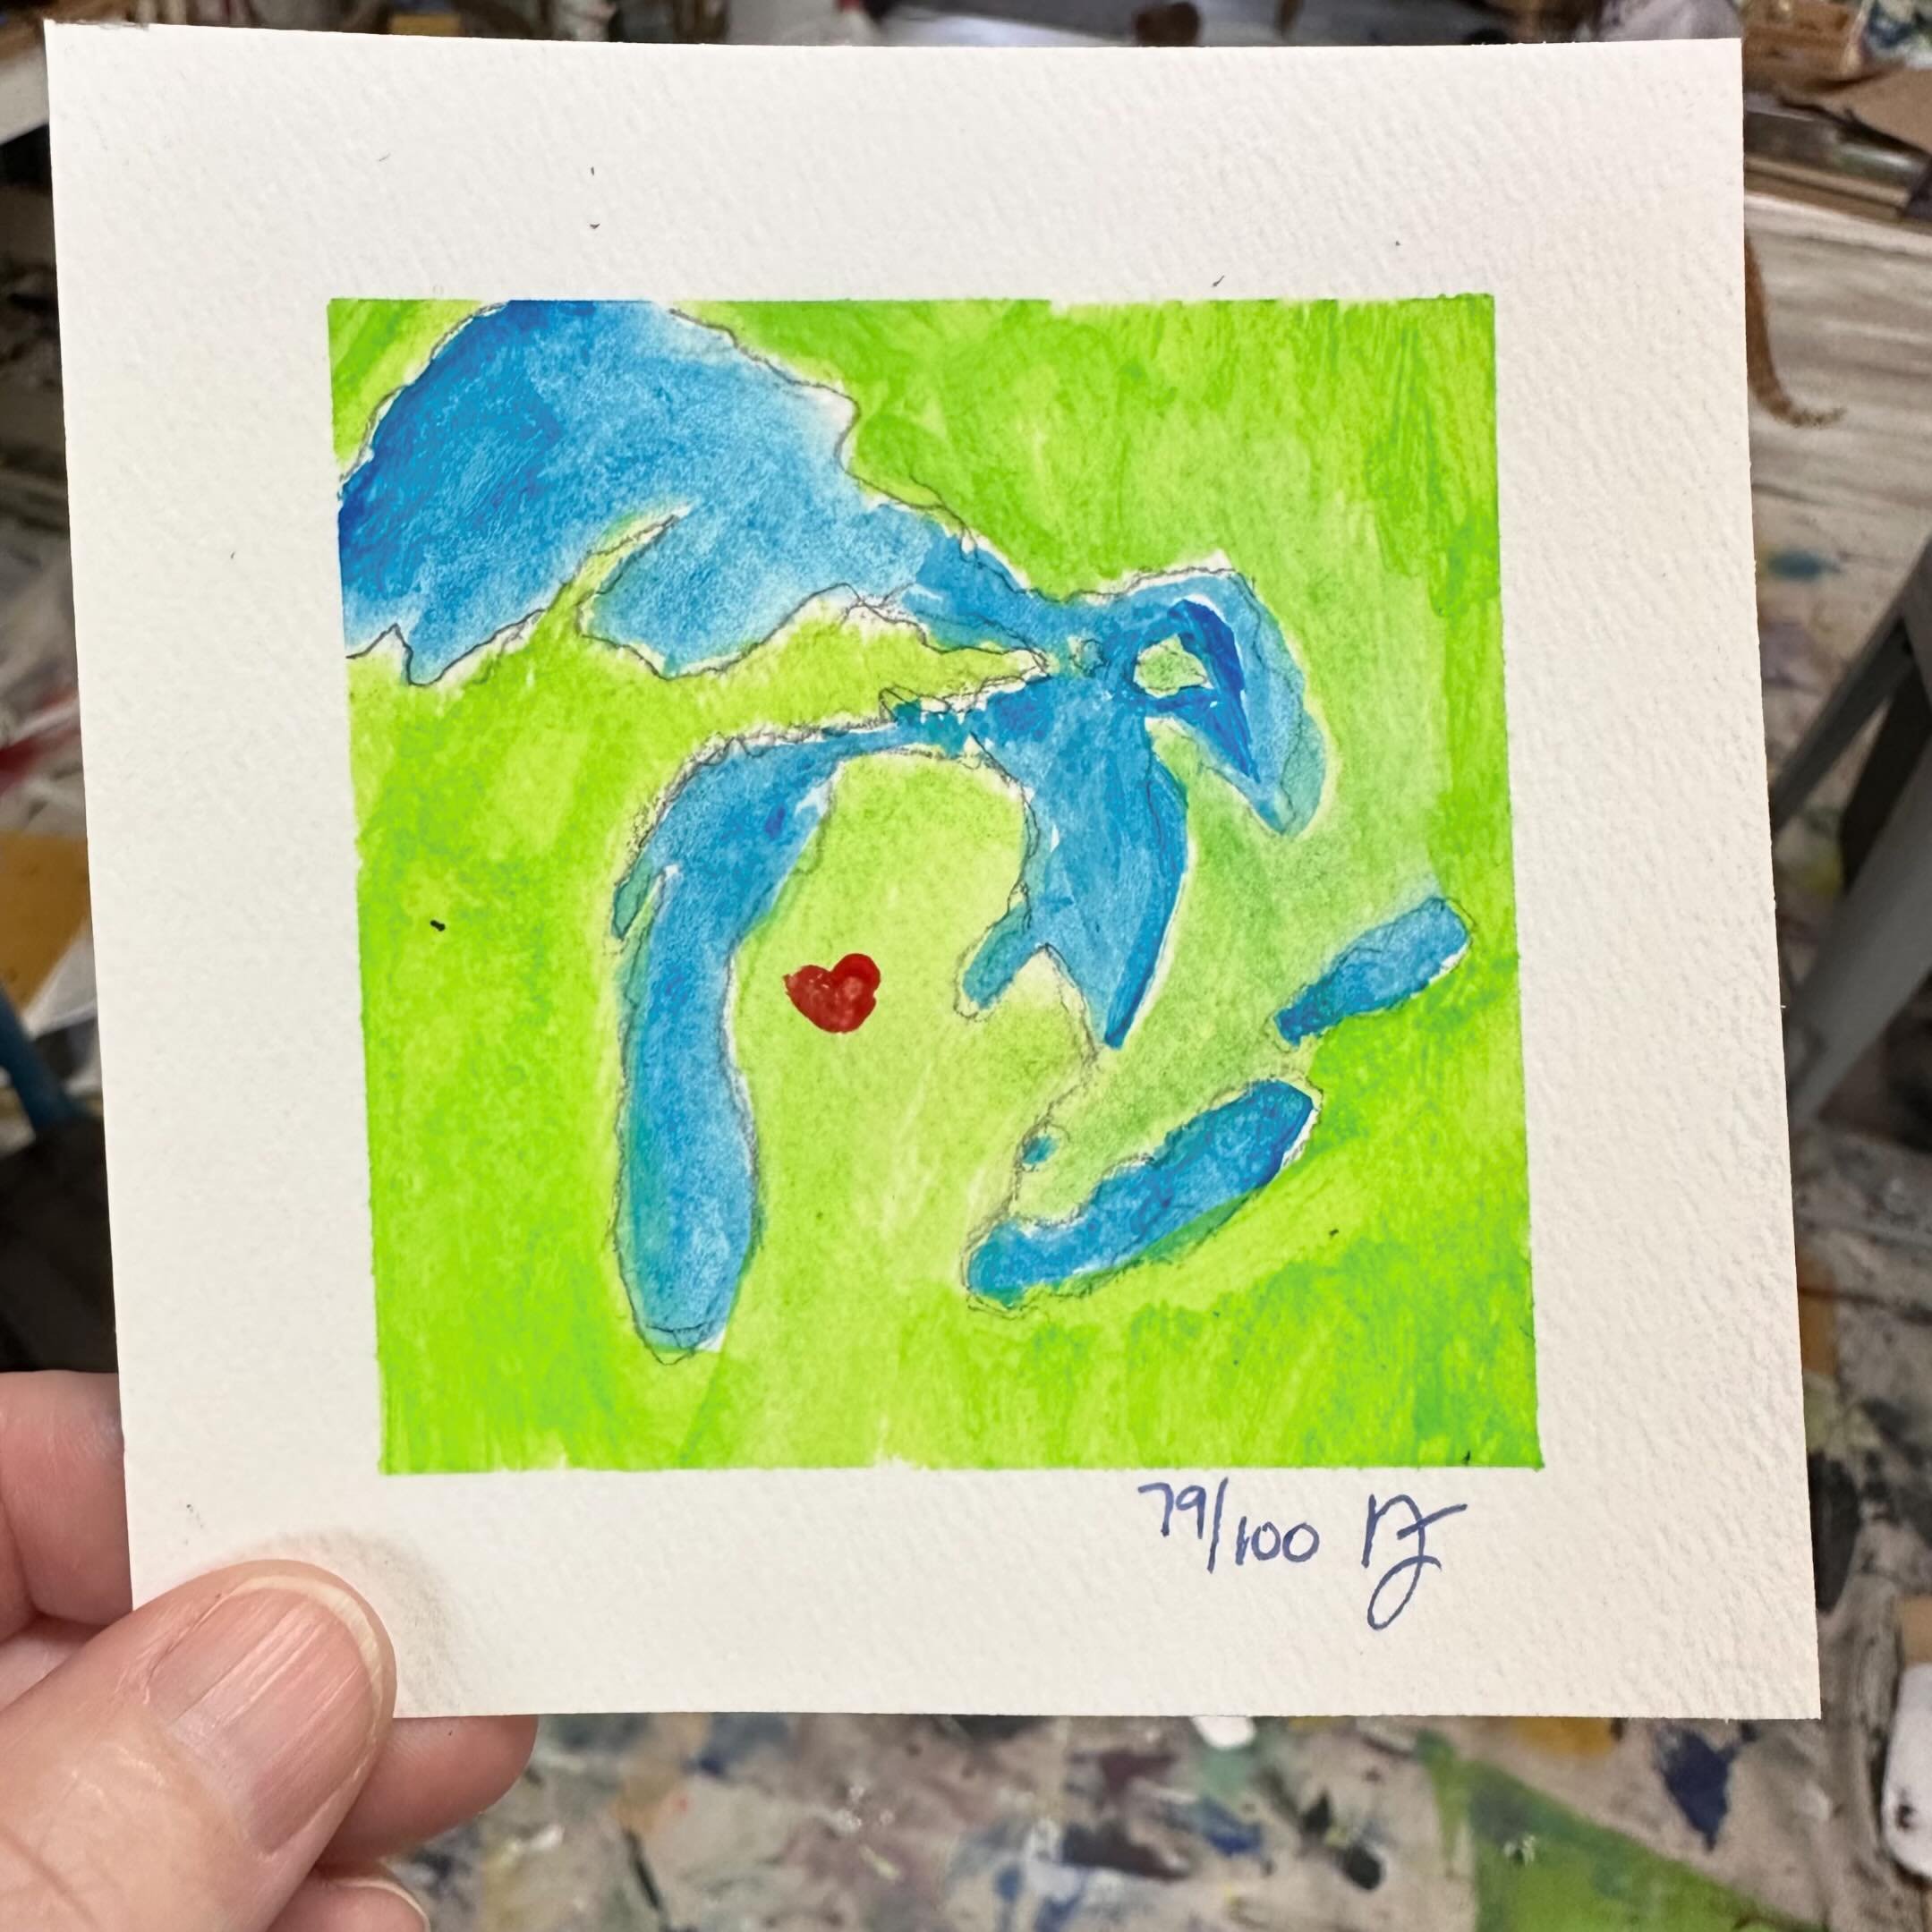 #the100dayproject Day 79! Not too much imagination here - today is Great Lakes Awareness Day 
.
.
#greatlakes #michigan #artist #art #miniart #createeveryday #create #paint #painteveryday